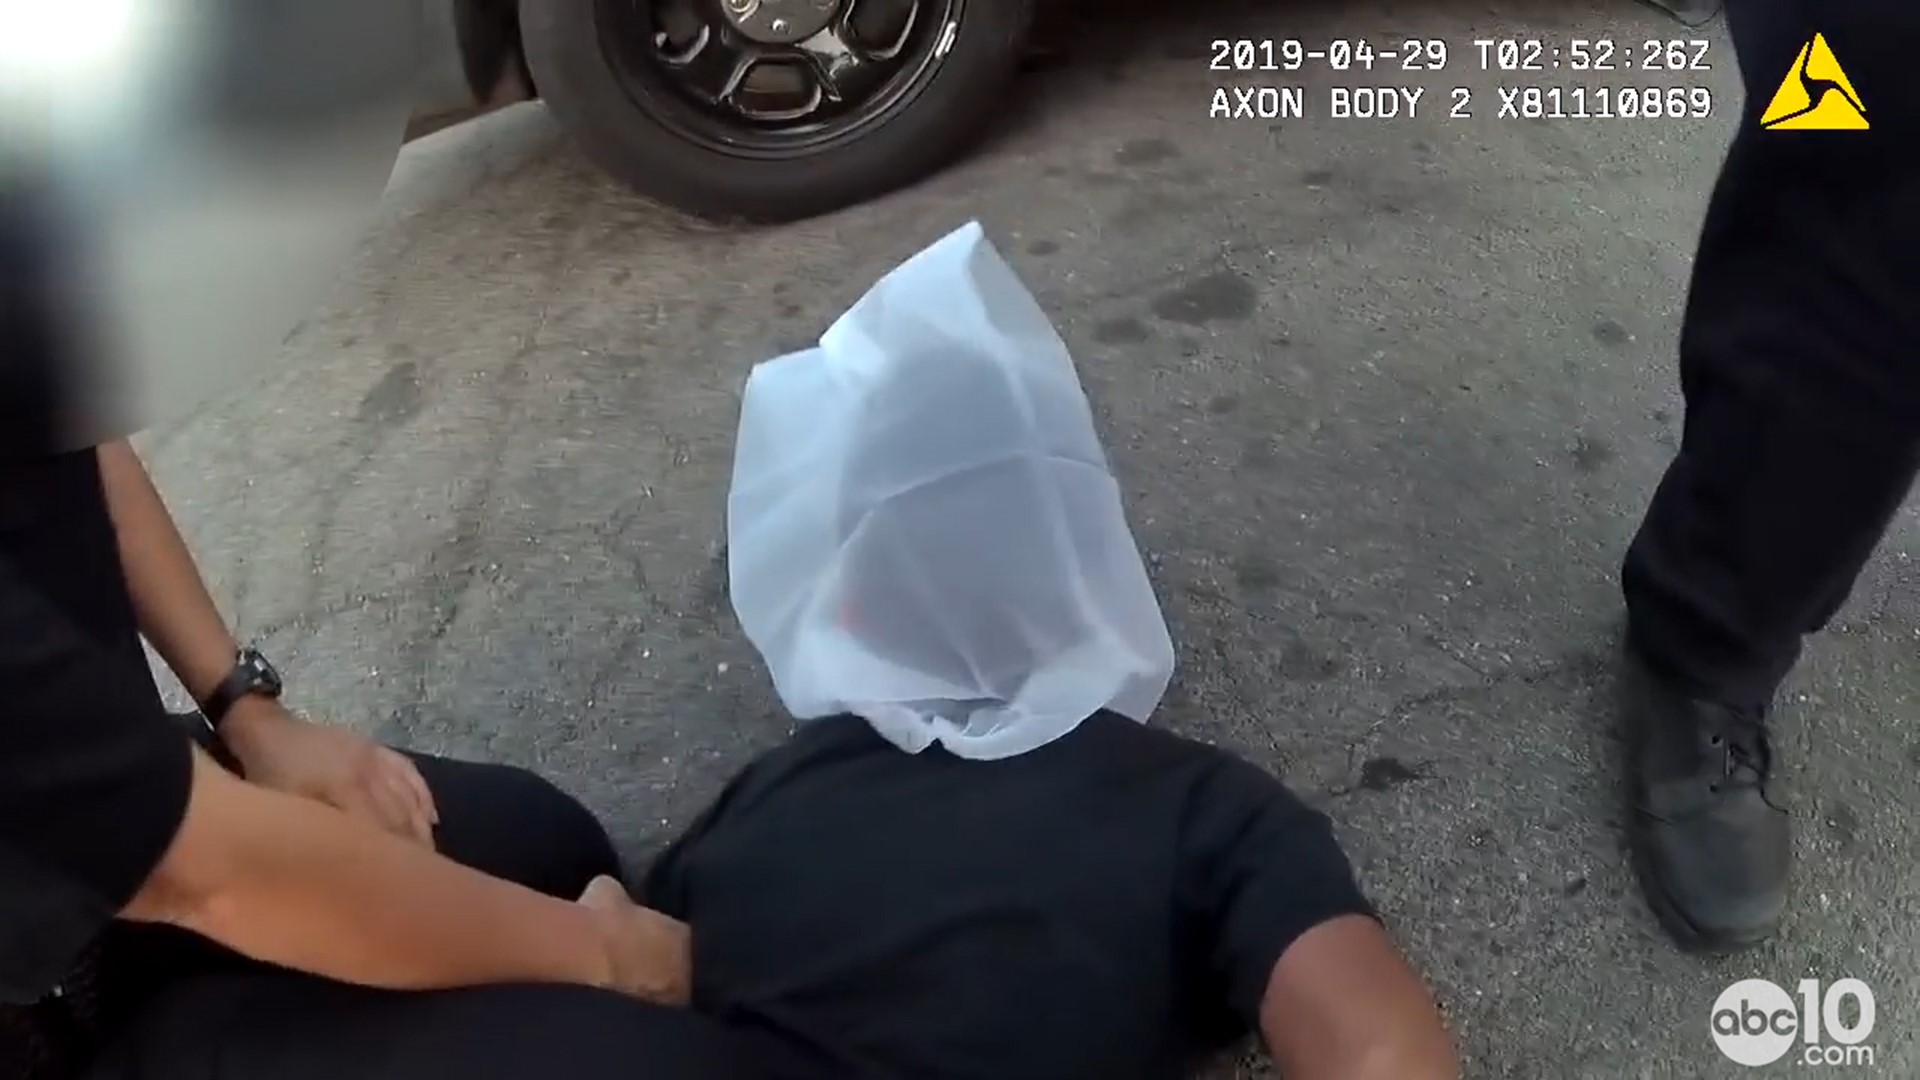 Sacramento Police are reviewing the arrest of a 12-year-old after a video of officers putting a hood over the boy's head went viral. Sacramento Police provided this body cam footage.